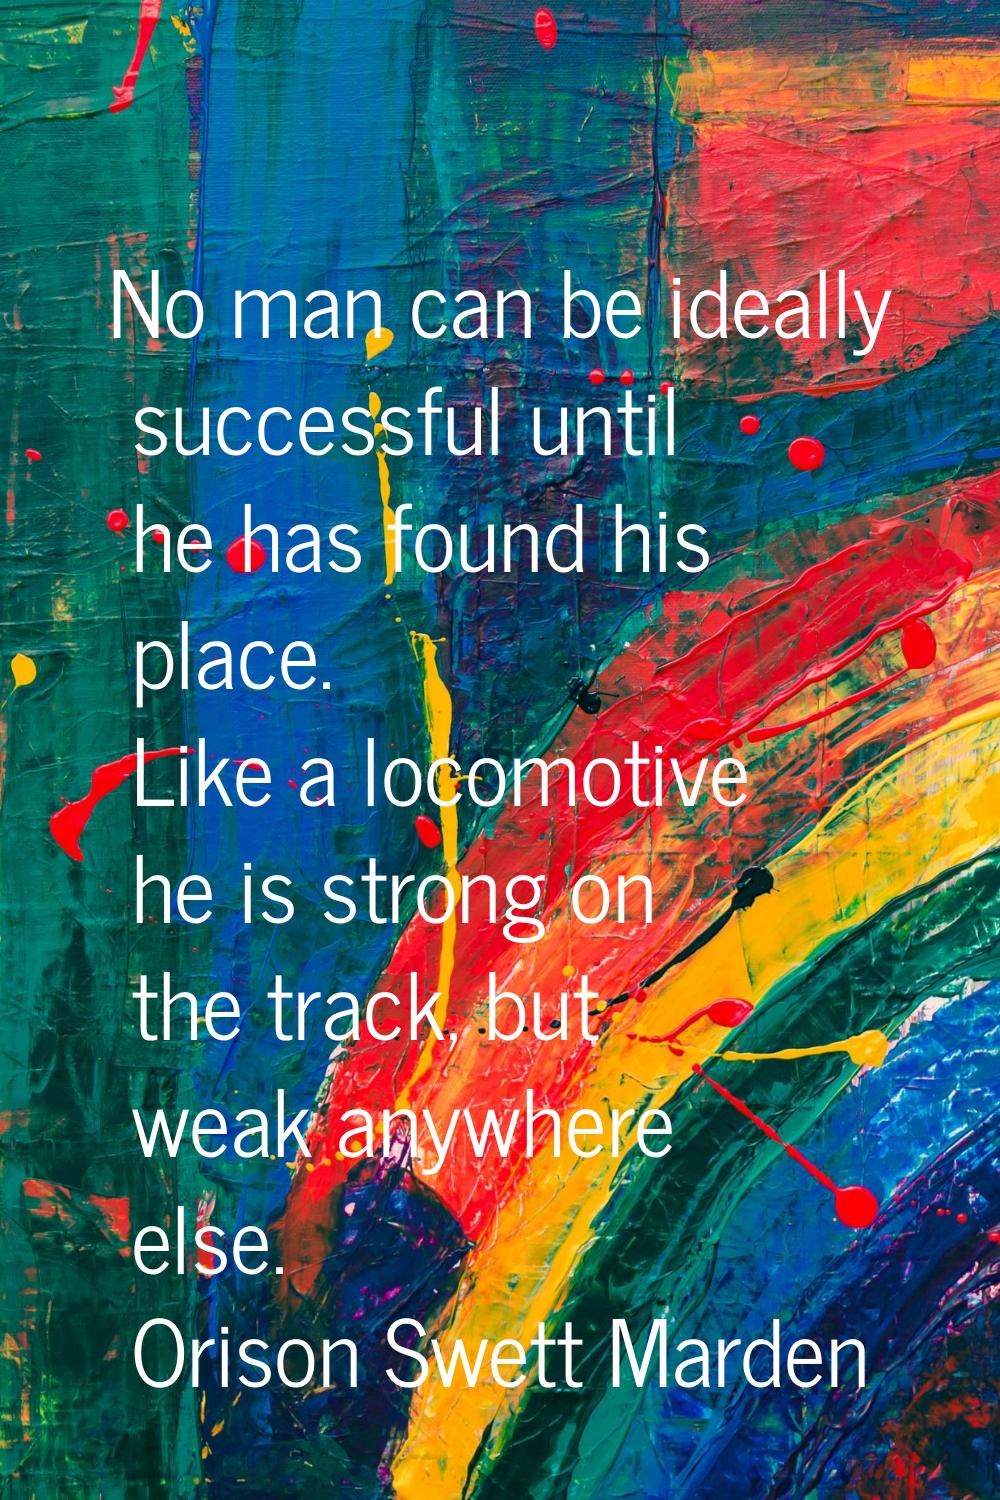 No man can be ideally successful until he has found his place. Like a locomotive he is strong on th